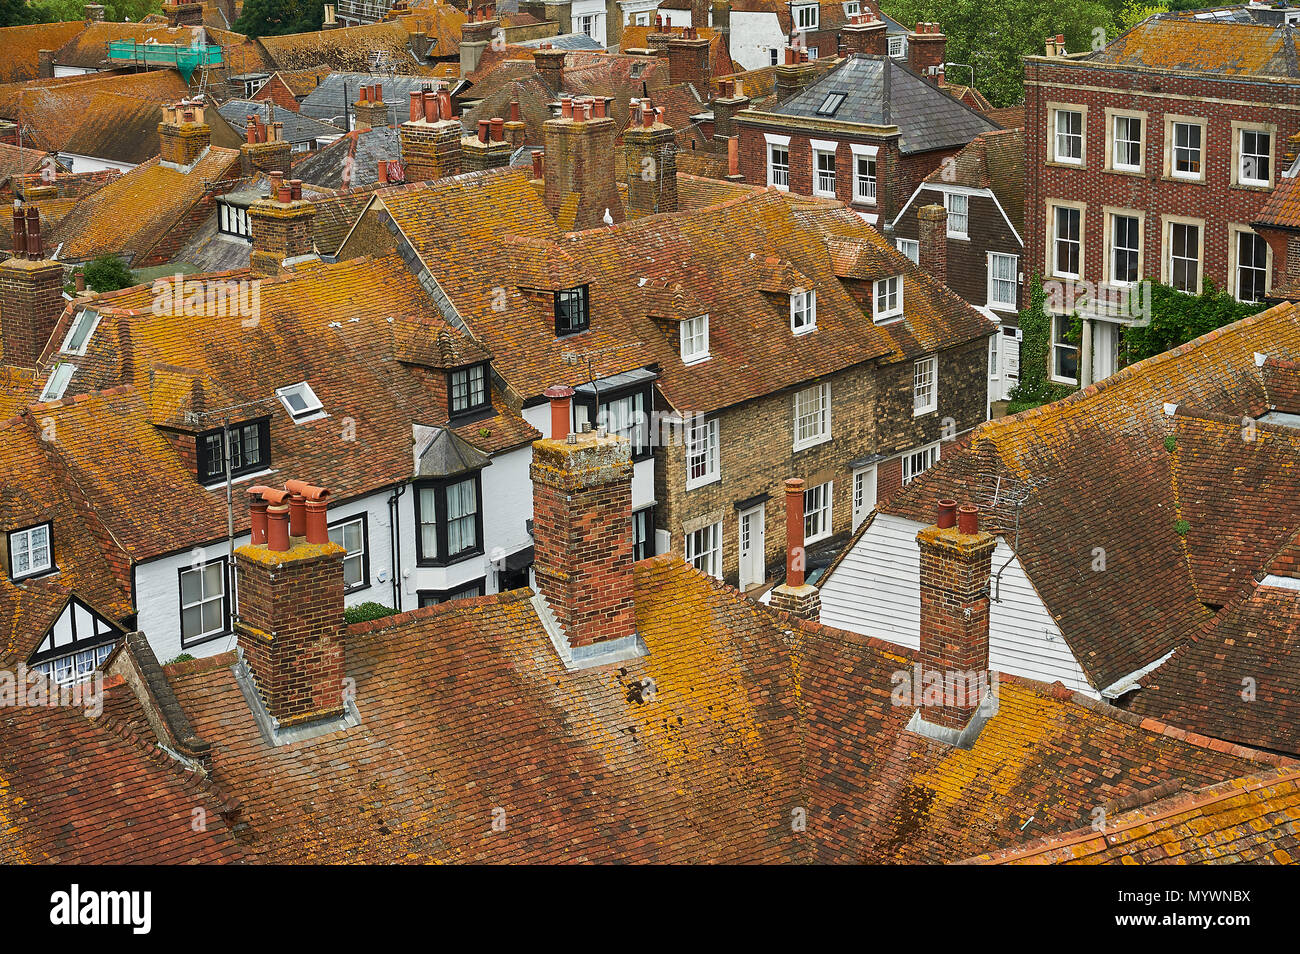 The old town of Rye seen from the top of the church tower Stock Photo